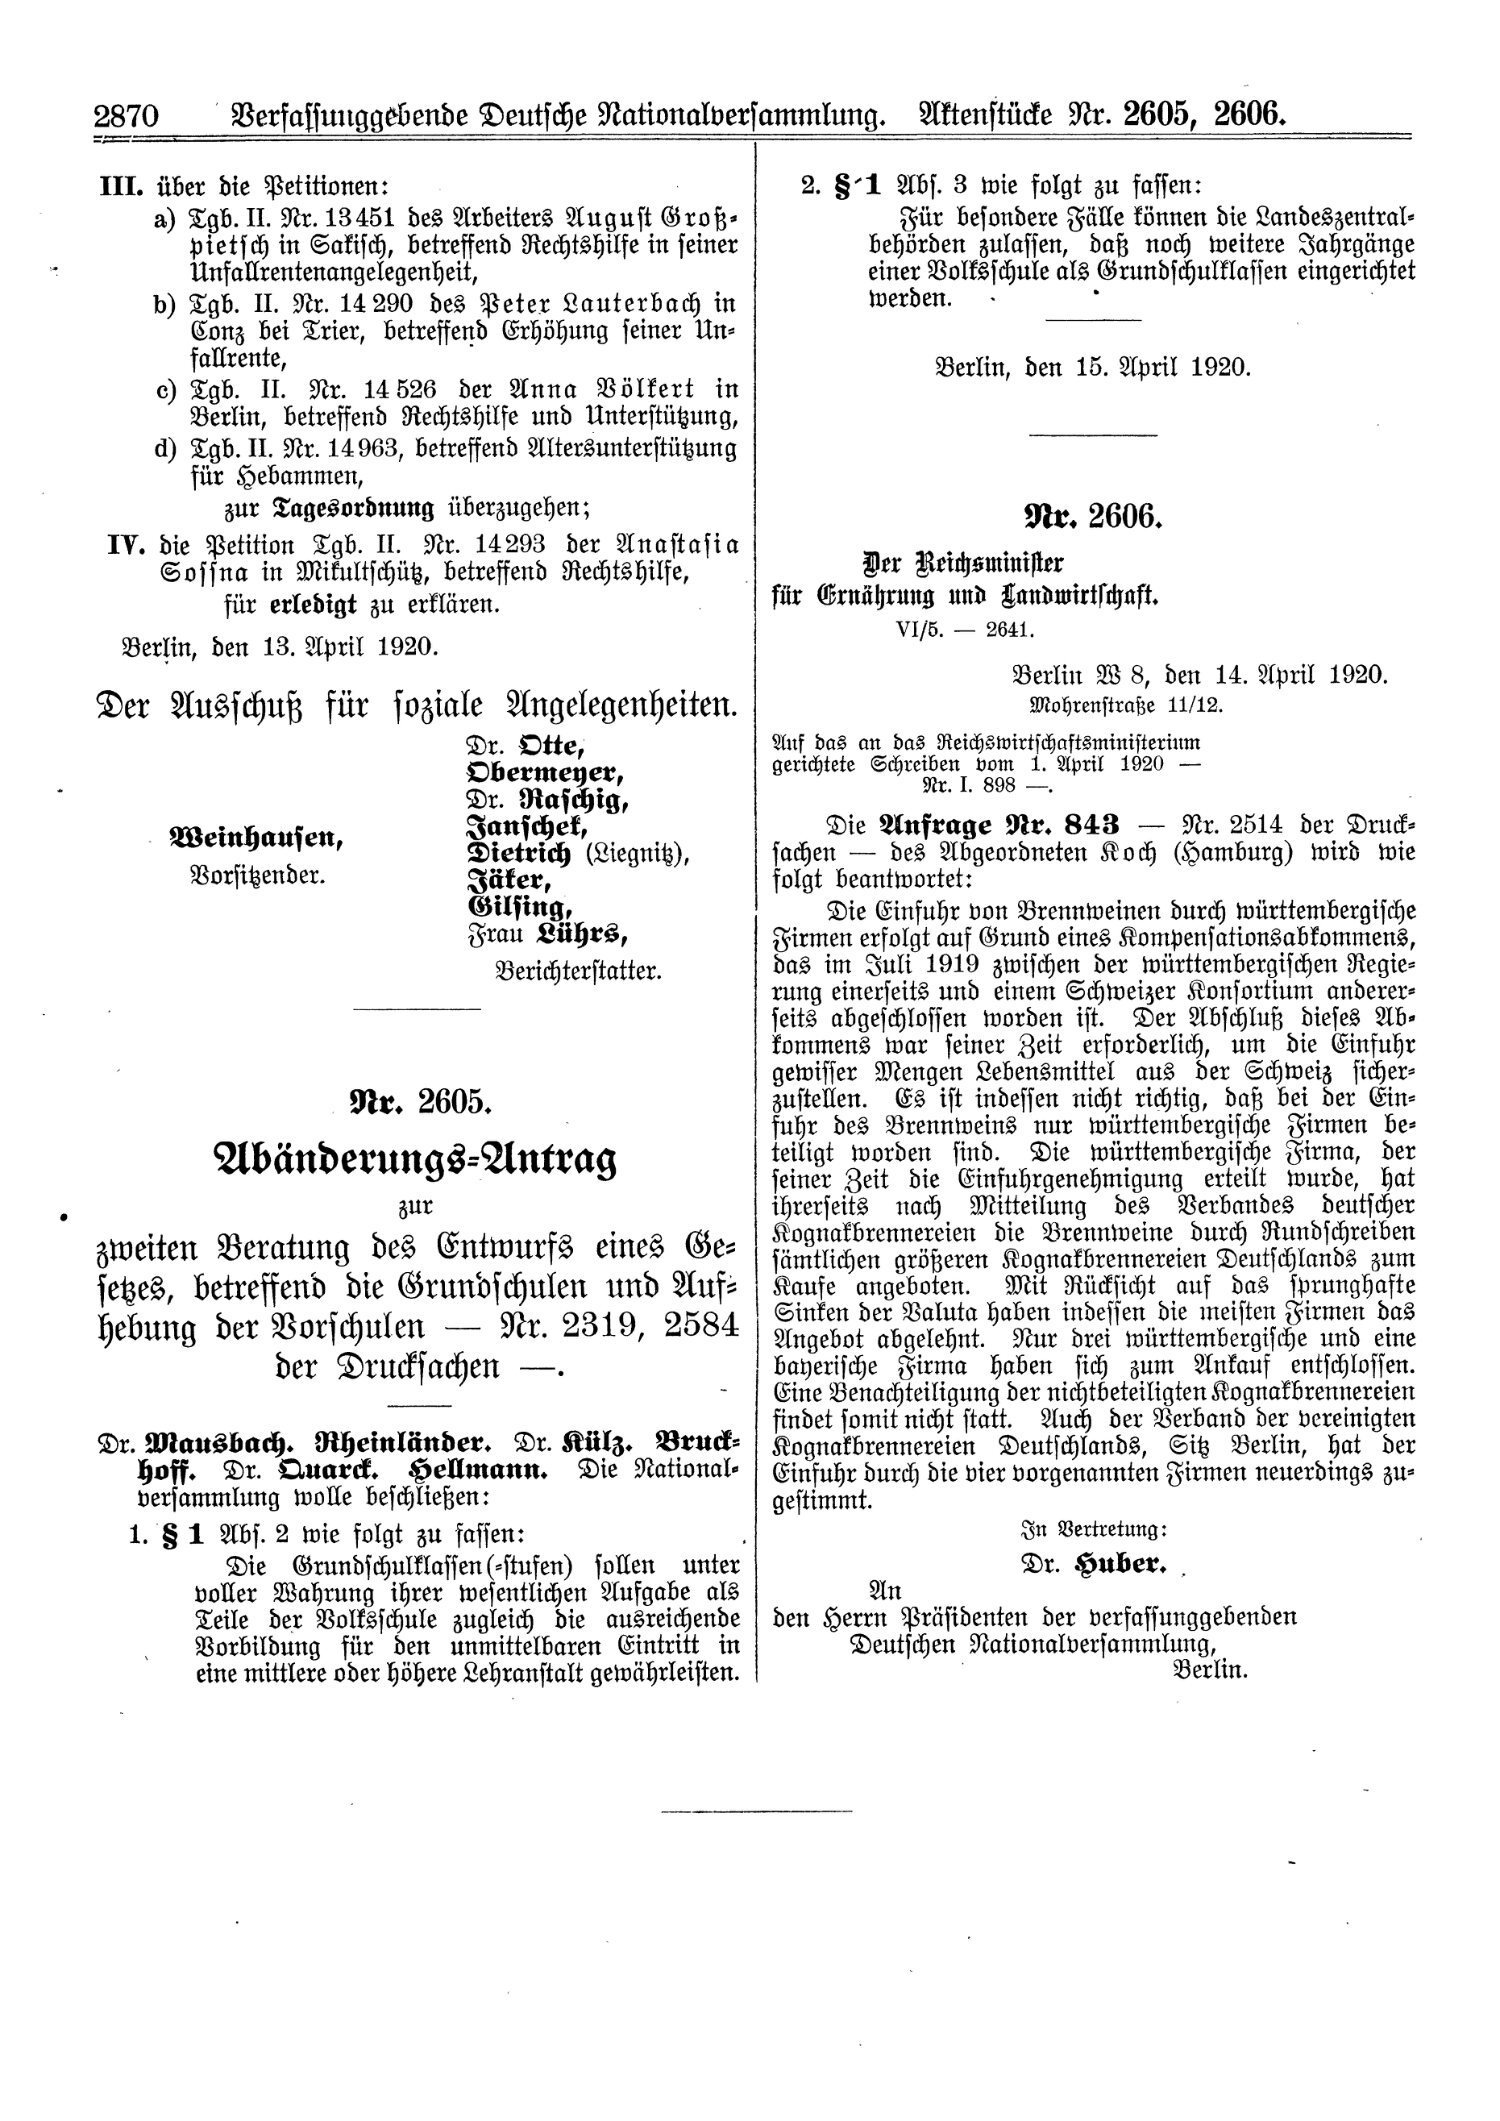 Scan of page 2870